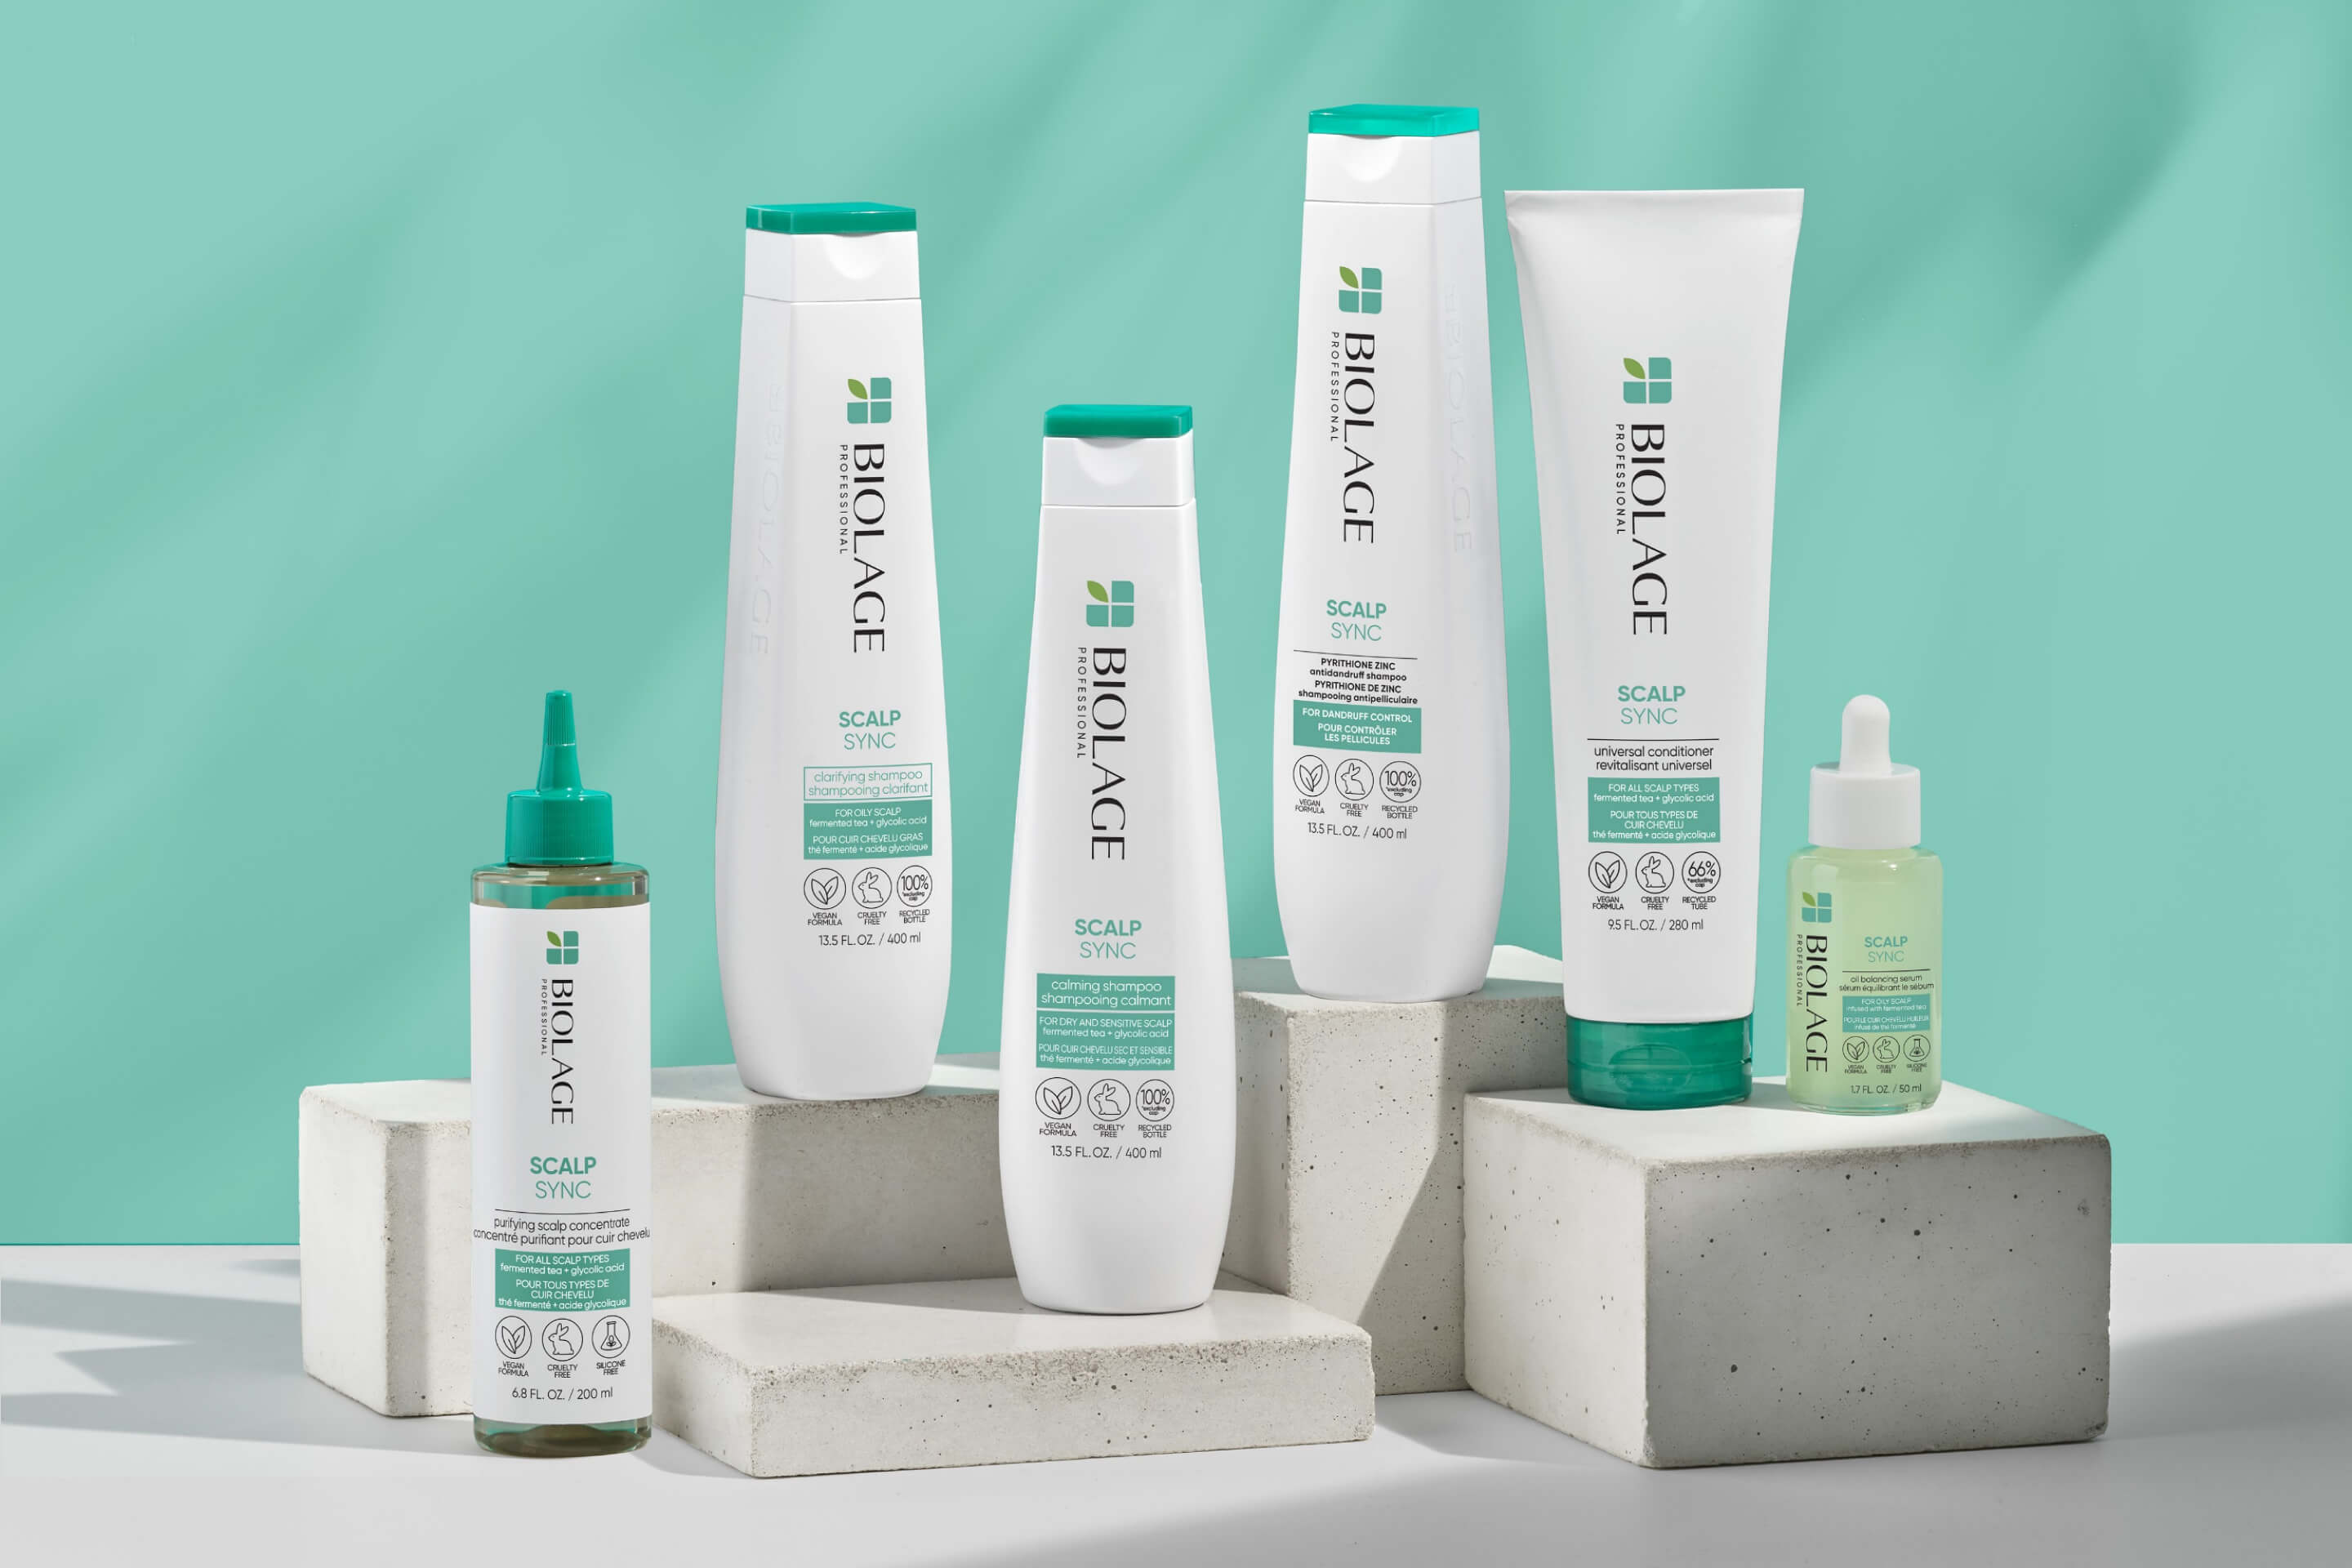 Scalp Sync products